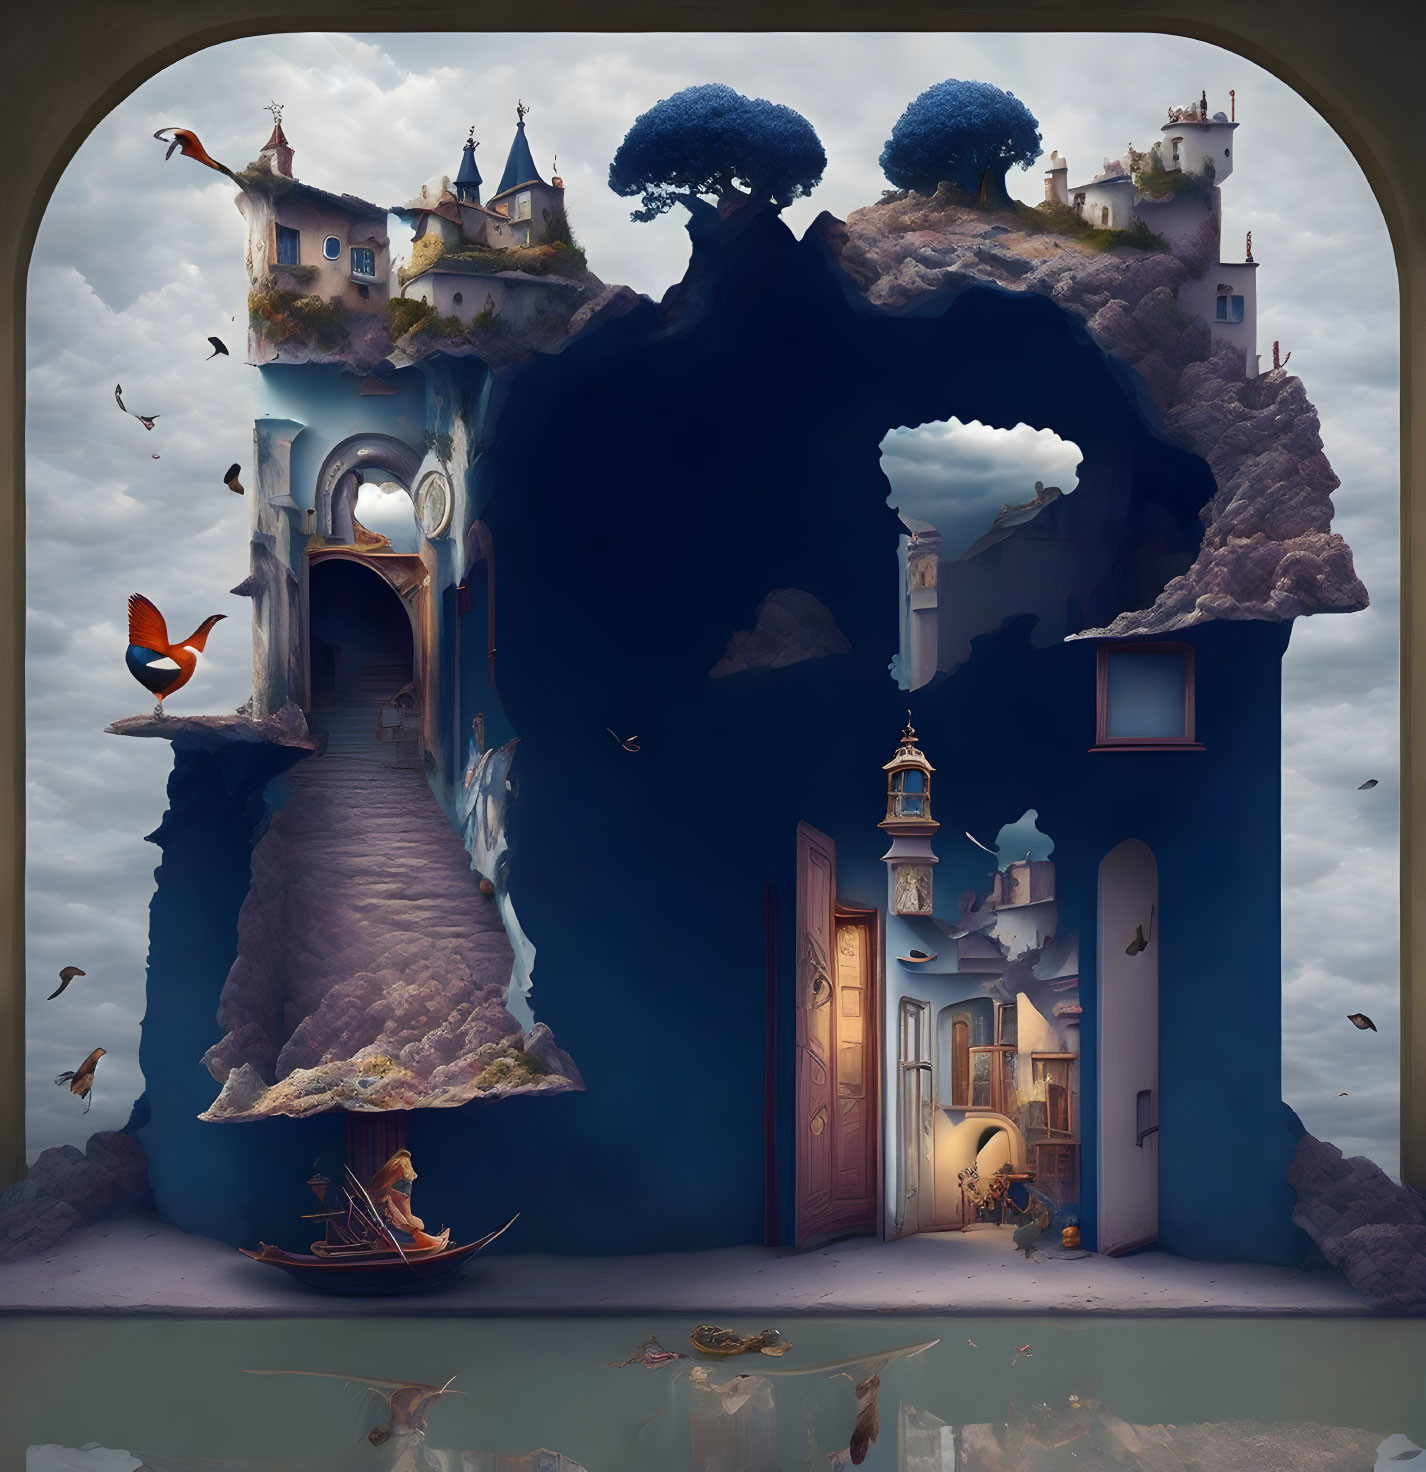 Surreal floating rocky island with whimsical buildings and boat in keyhole silhouette